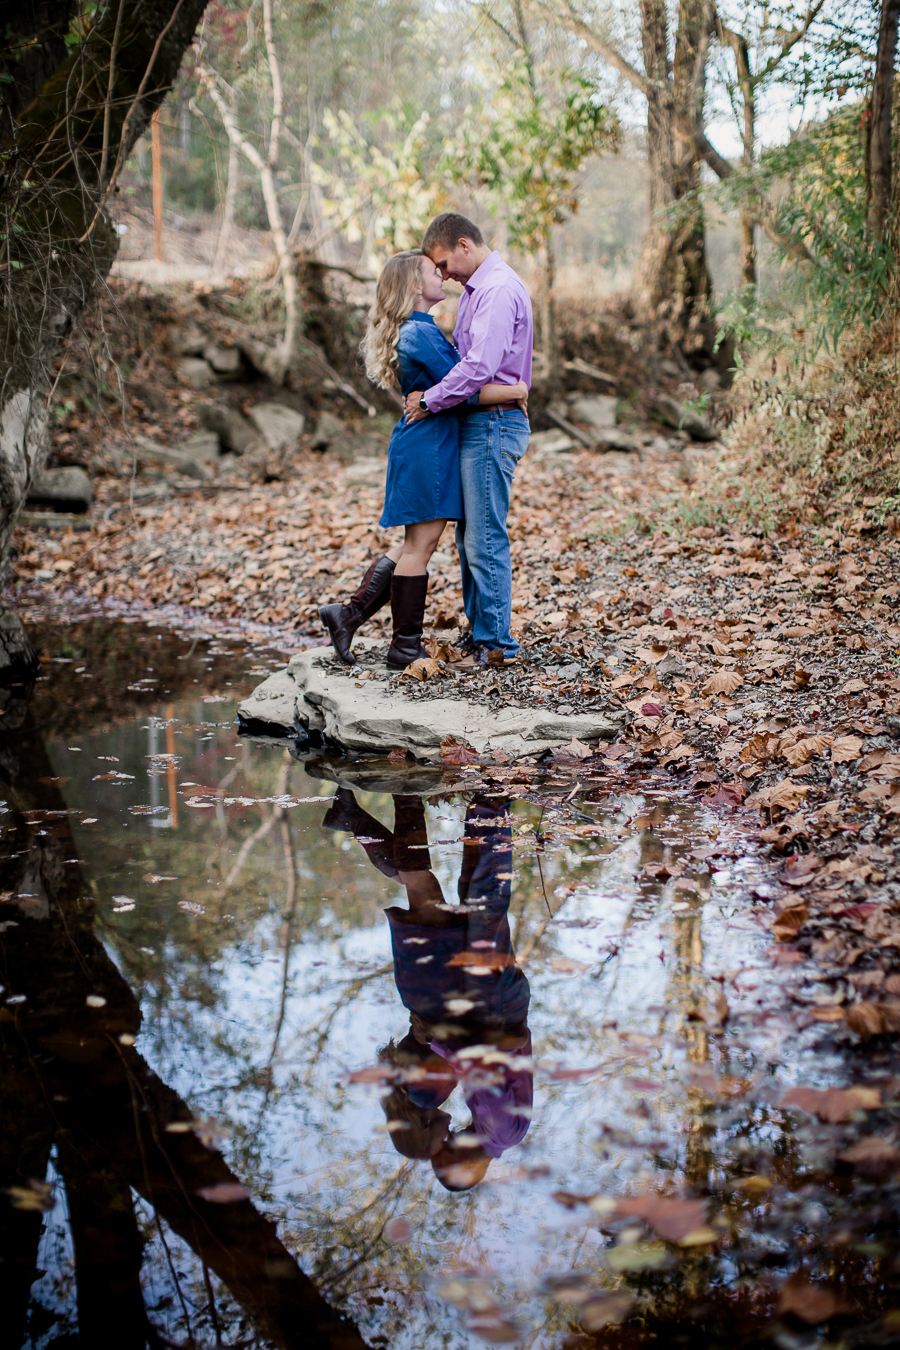 Reflection in a puddle engagement photo by Knoxville Wedding Photographer, Amanda May Photos.